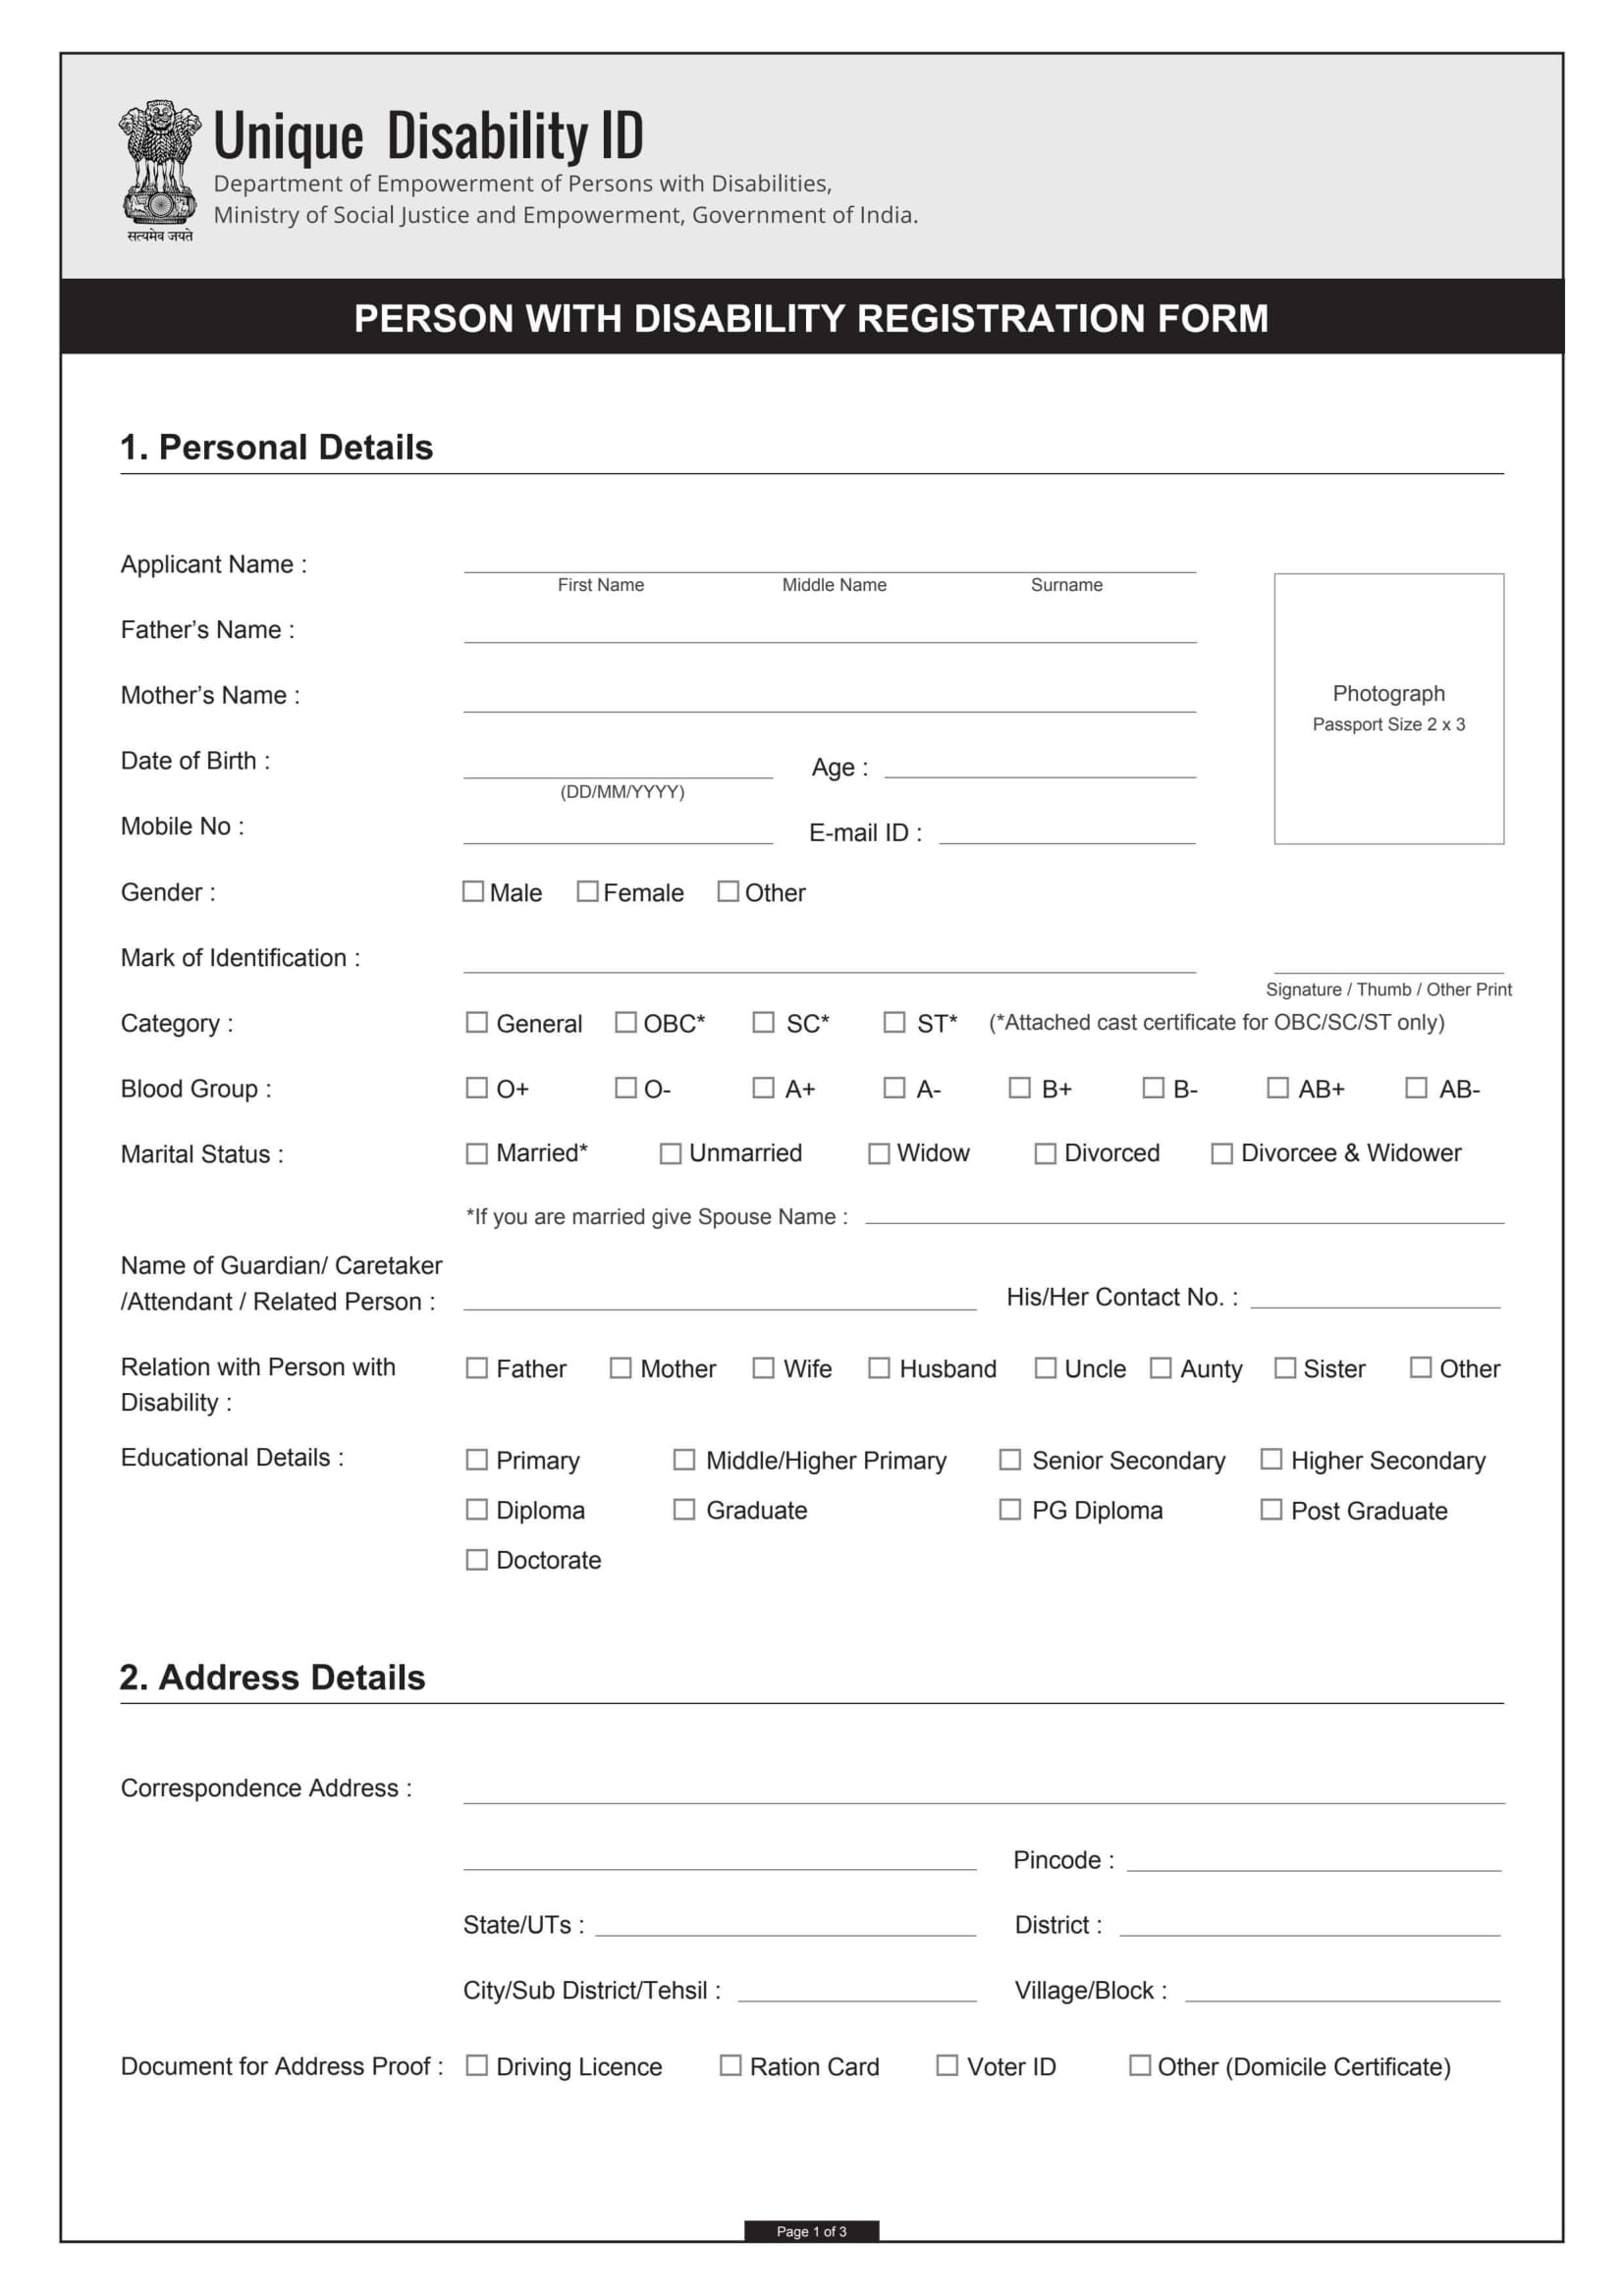 UDID Card Disability Certificate Online application Form-1-1